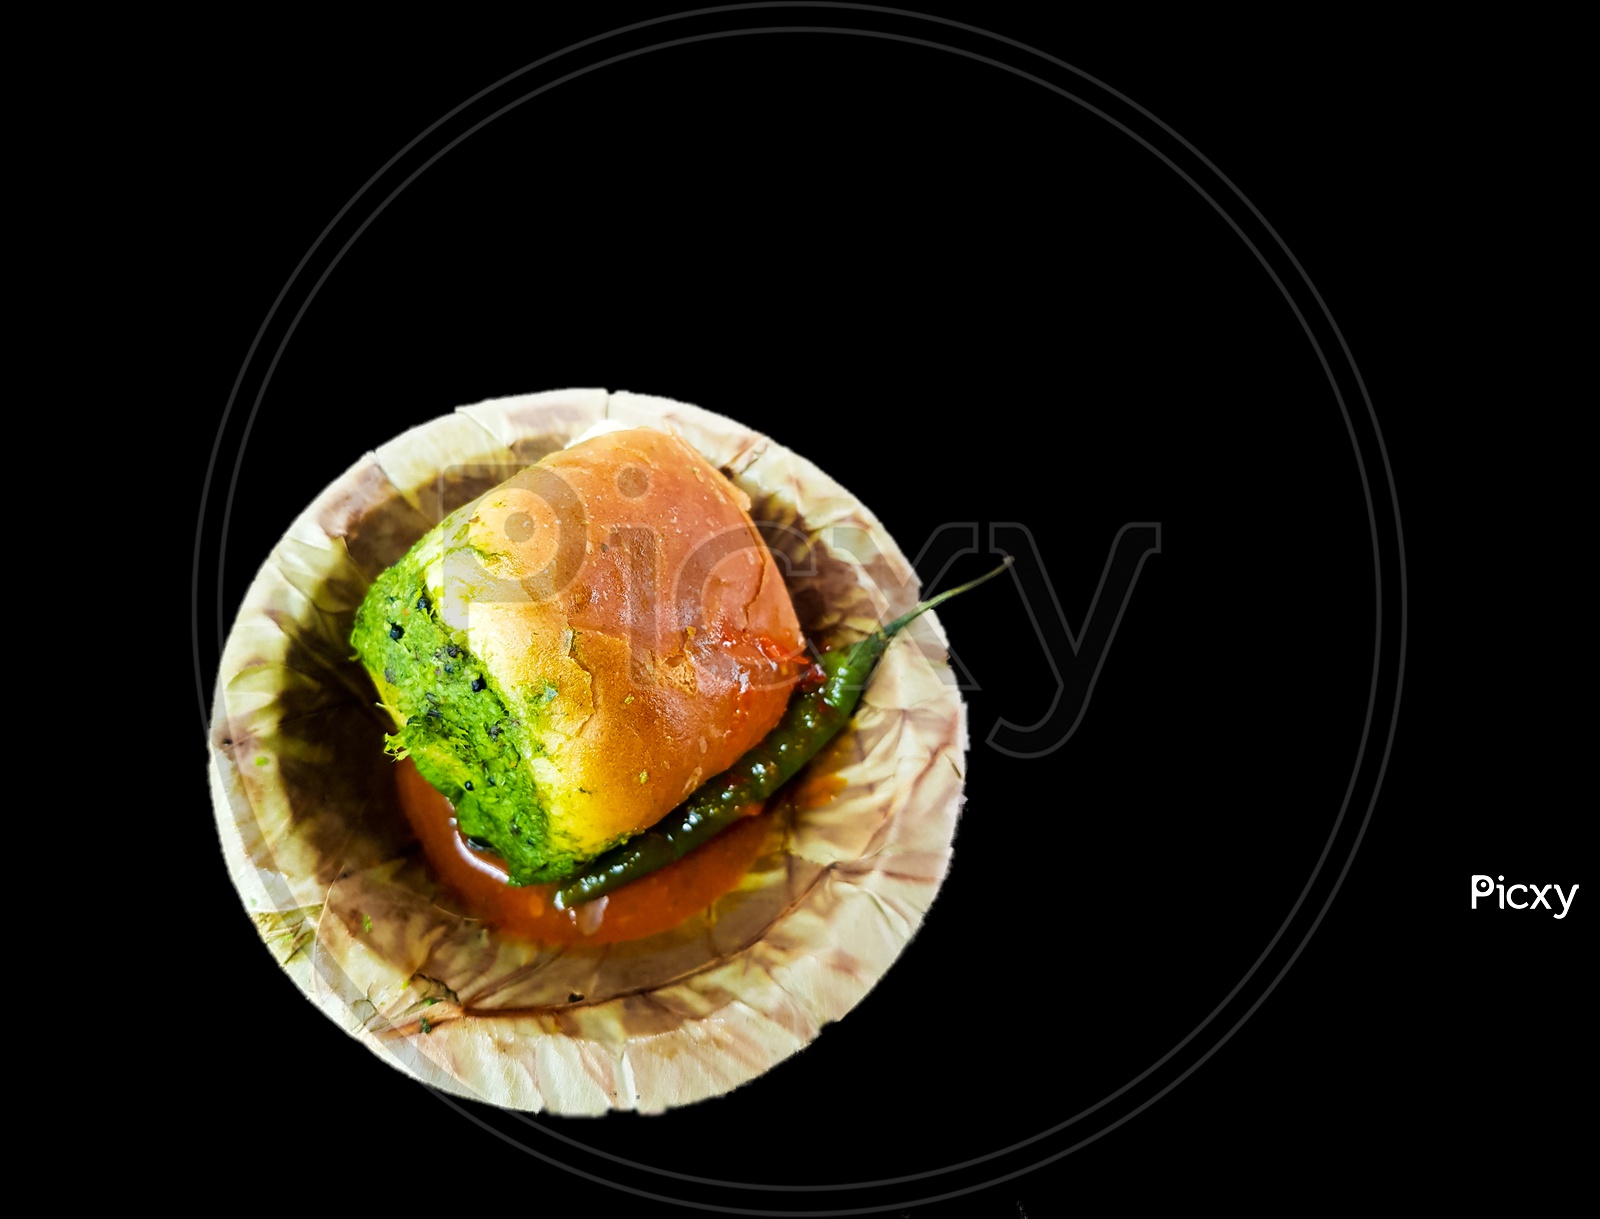 Vada Pau Bread And Green Sauce On A Plate In Dark Background